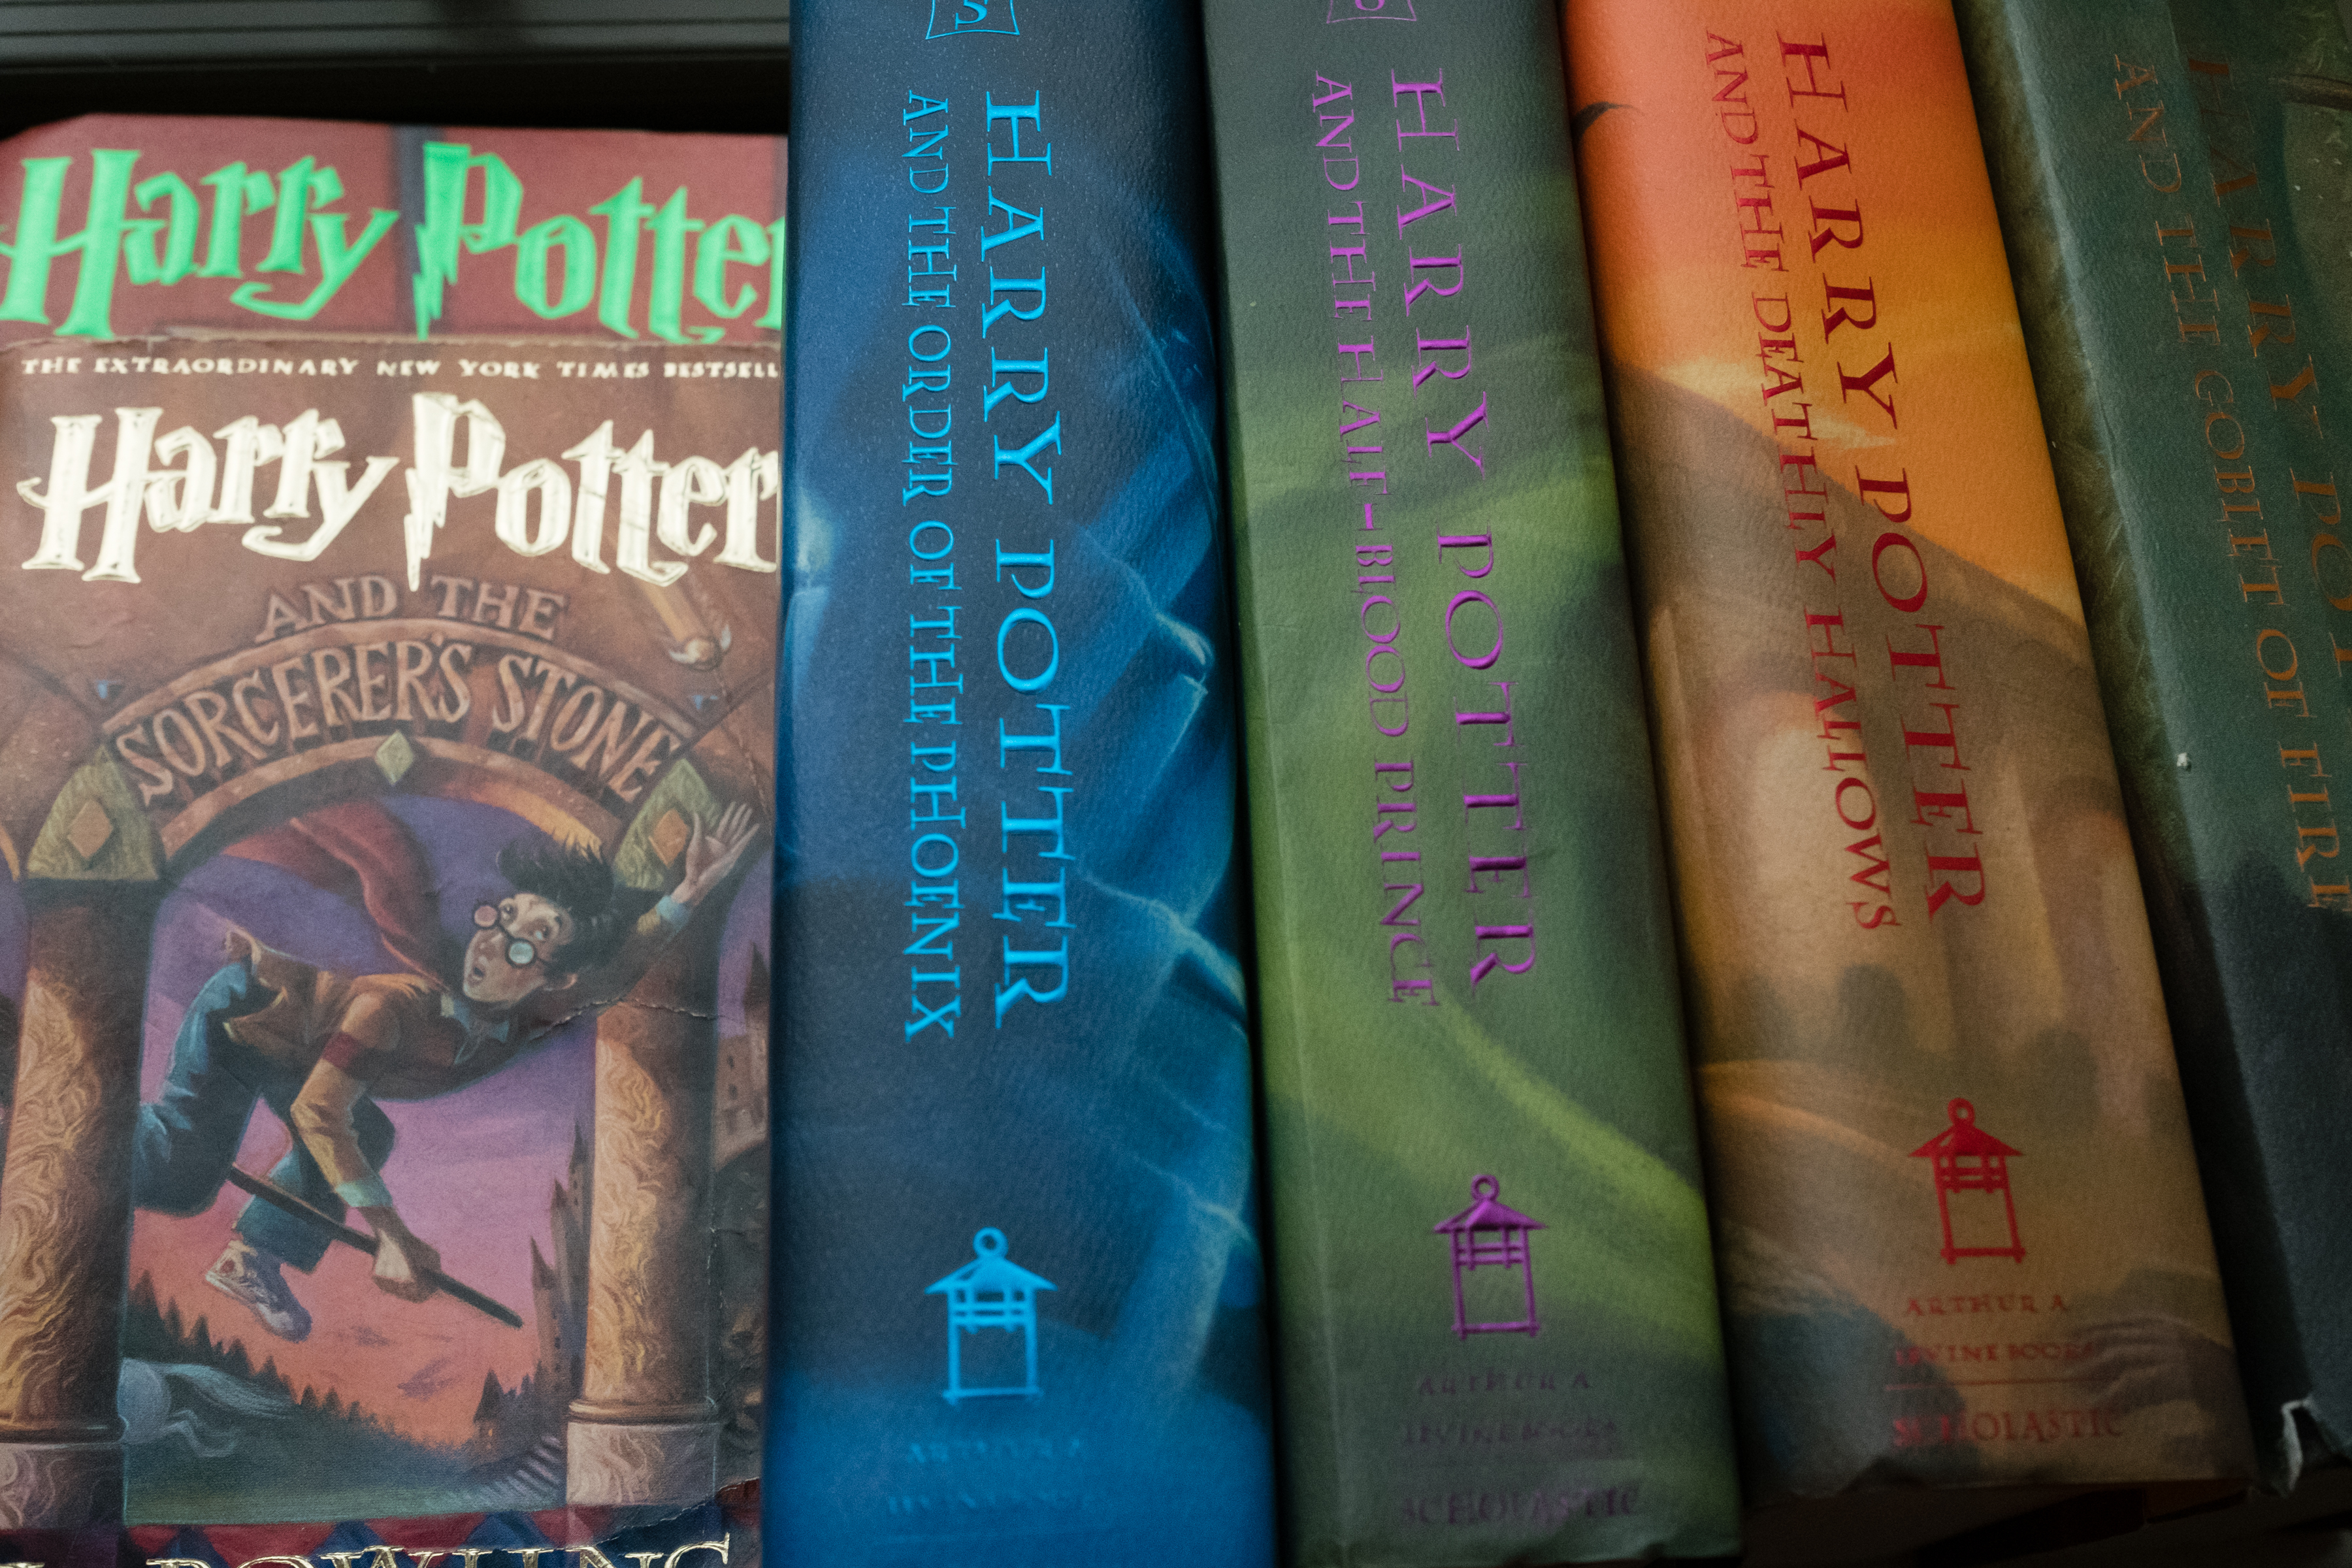 A collection of Harry Potter books are pictured at the home of Caitlin Moore in Washington, D.C. (Sarah L. Voisin—The Washington Post/Getty Images)